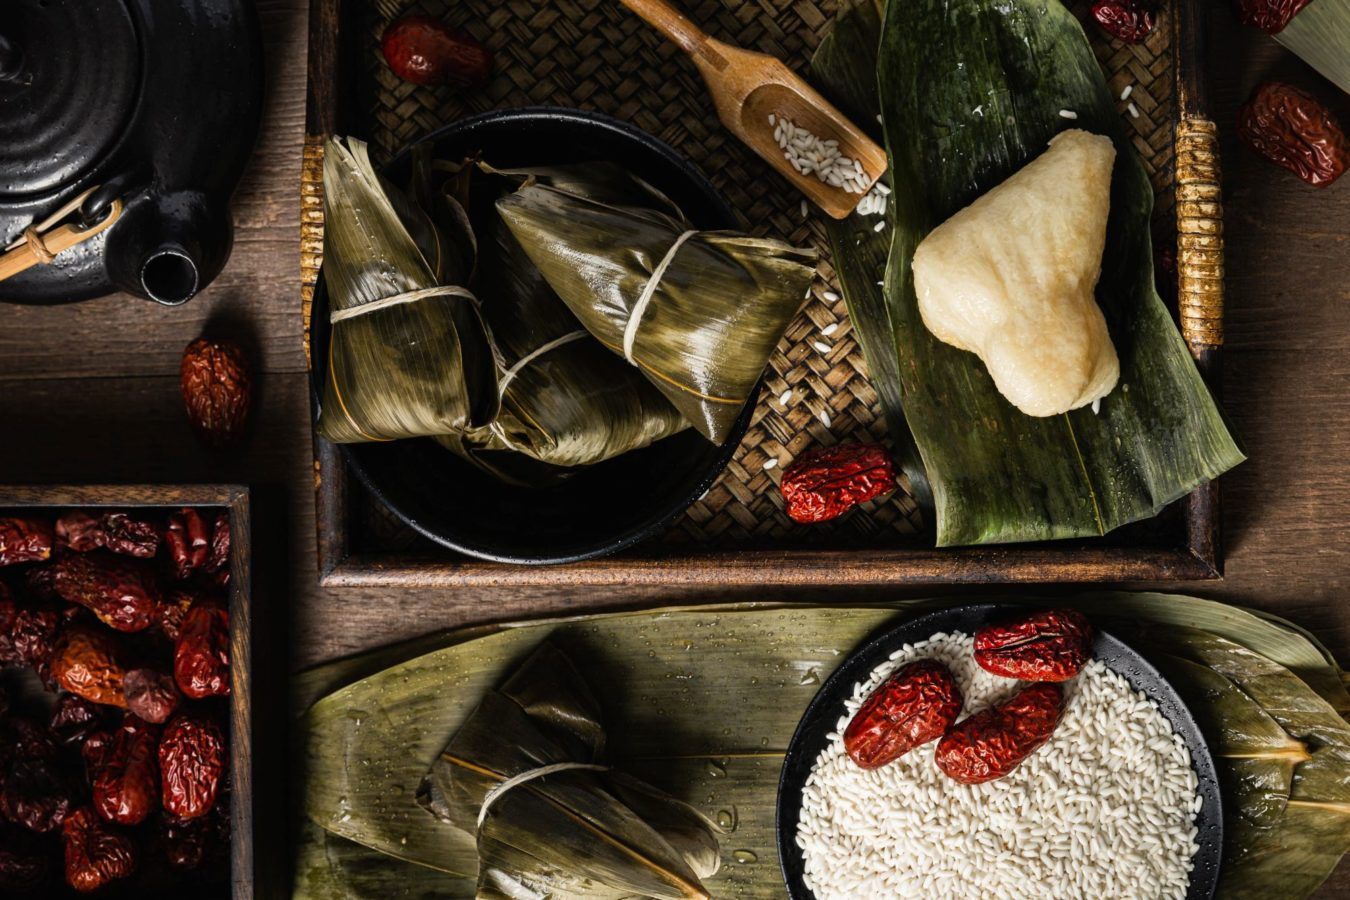 Where can you order halal or pork-free sticky rice dumplings online?